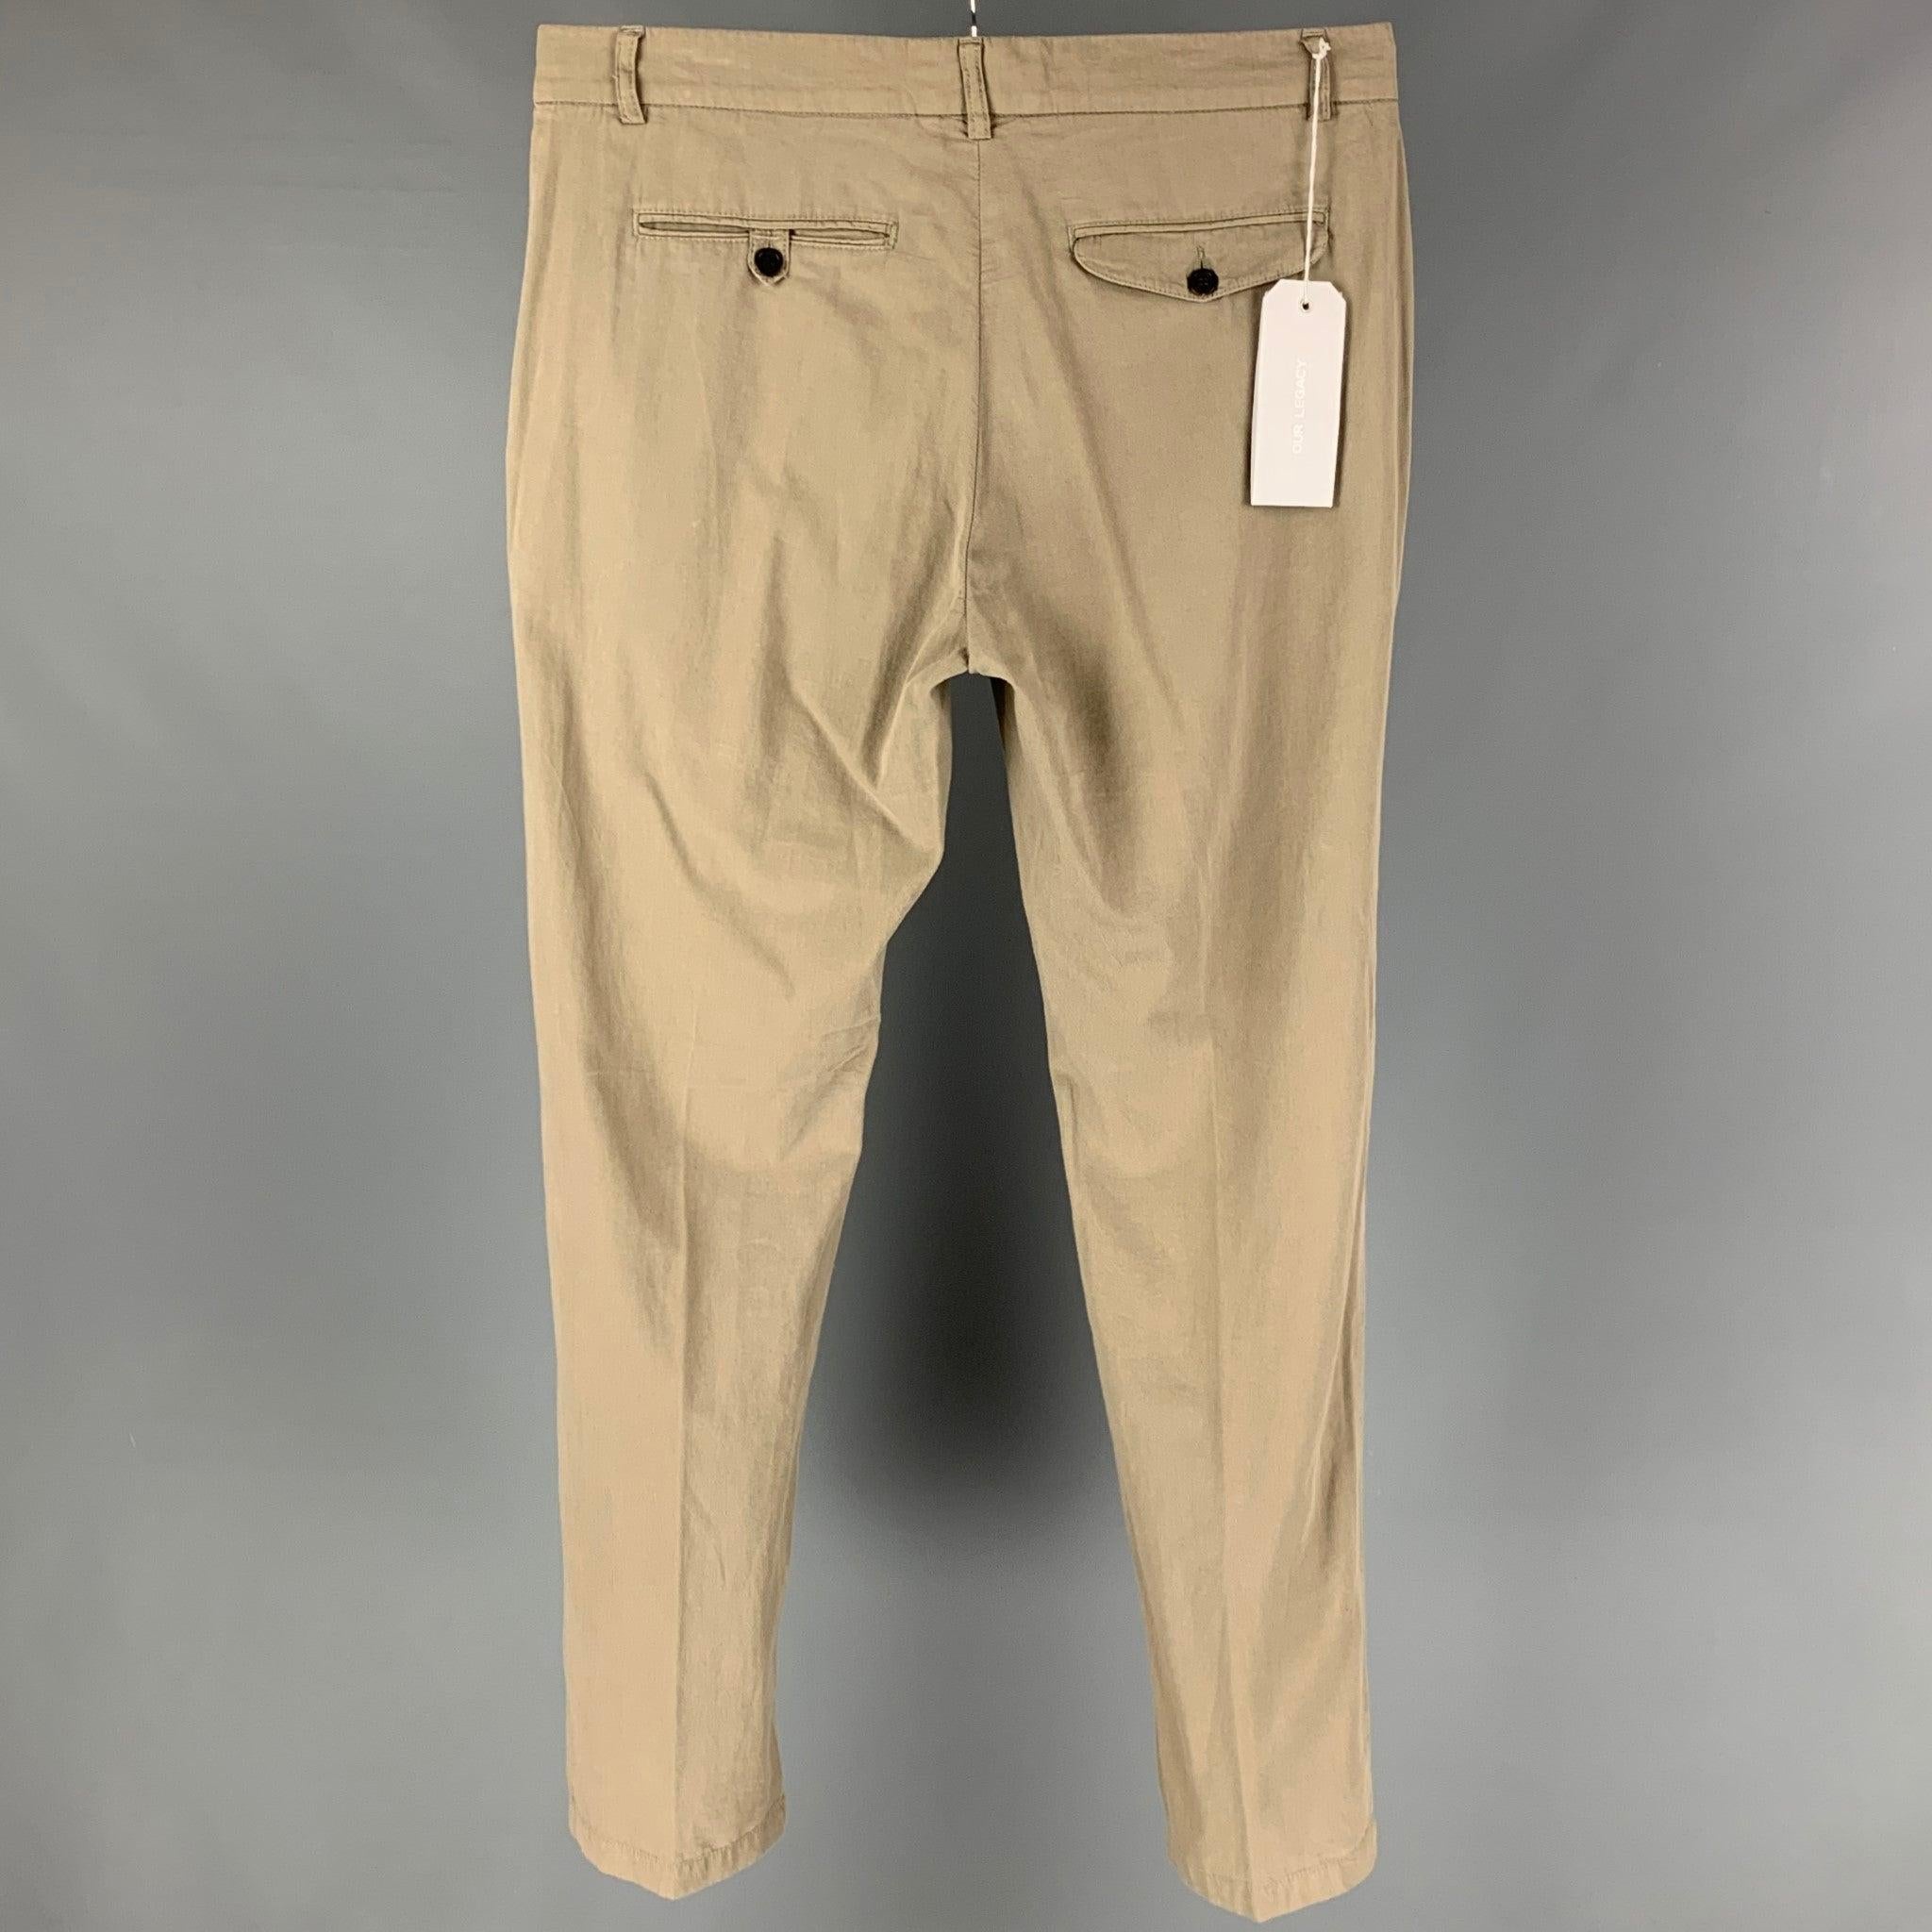 OUR LEGACY pants comes in a olive cotton featuring a classic chino style, slim fit, an a button fly closure.
New With Tags.
 

Marked:   50 

Measurements: 
  Waist: 36 inches  Rise: 11 inches  Inseam: 34 inches 
  
  
 
Reference: 119591
Category: